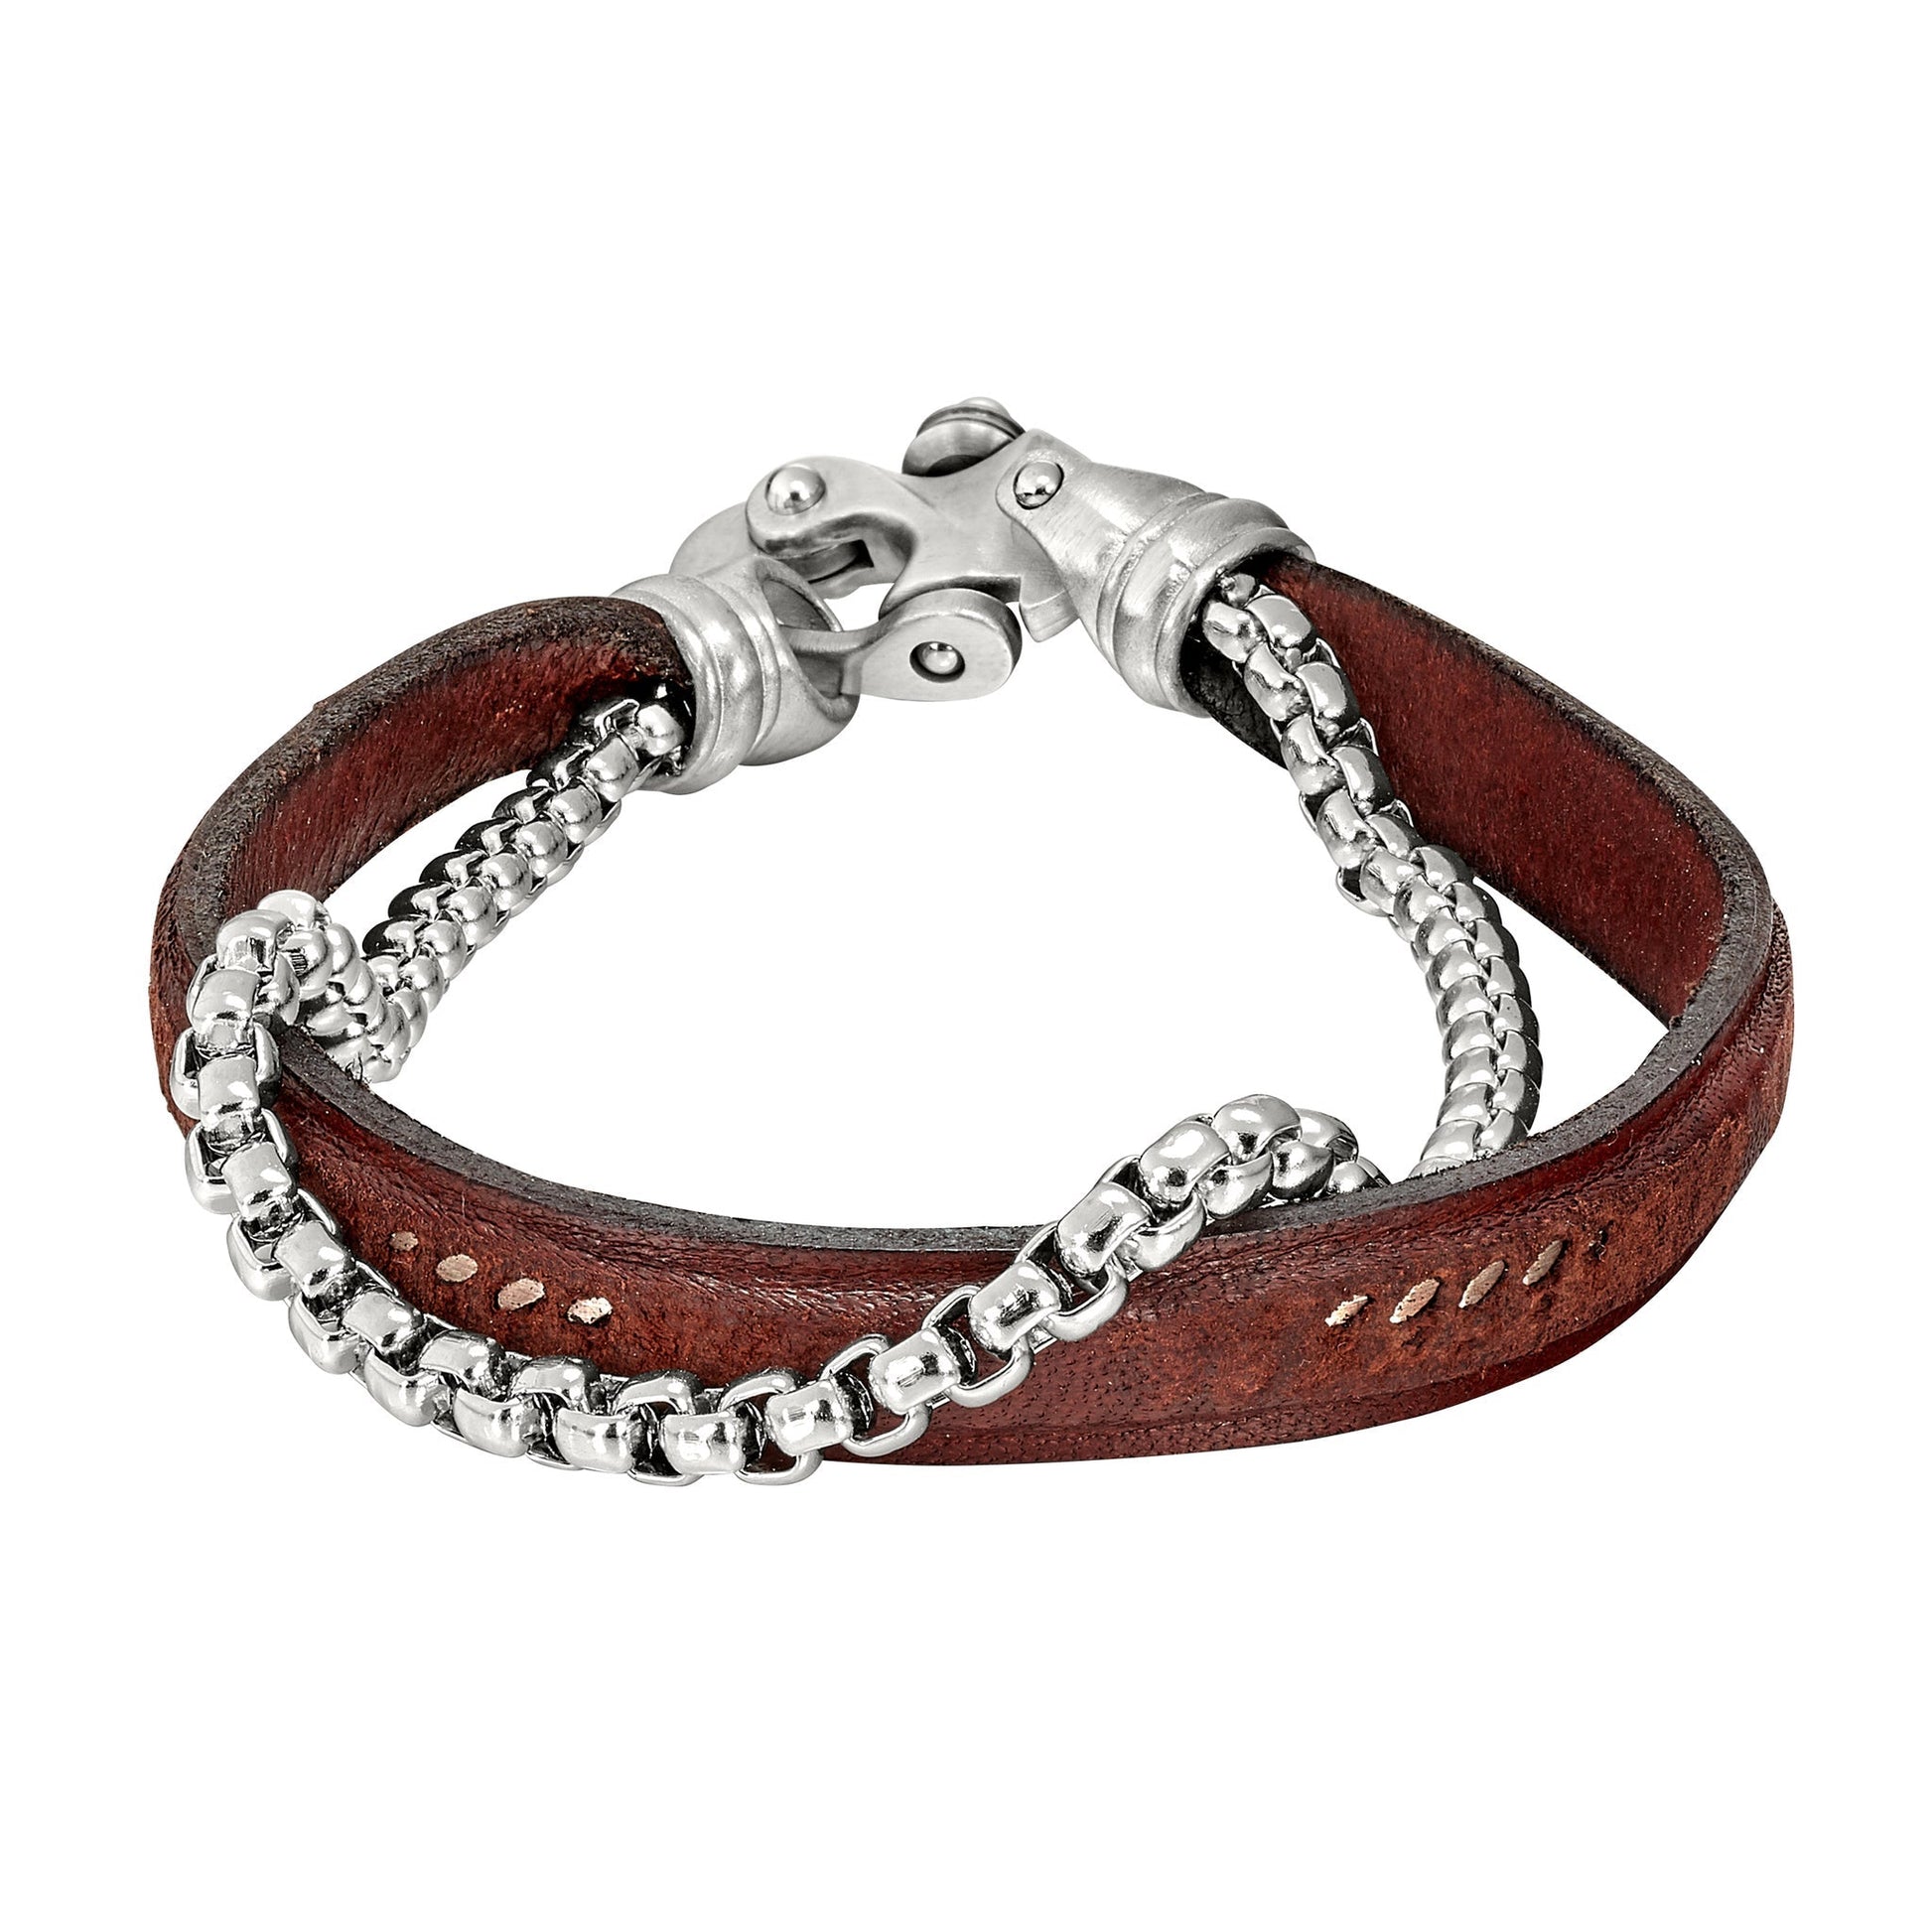 A men's leather cord bracelet with box link chain displayed on a neutral white background.